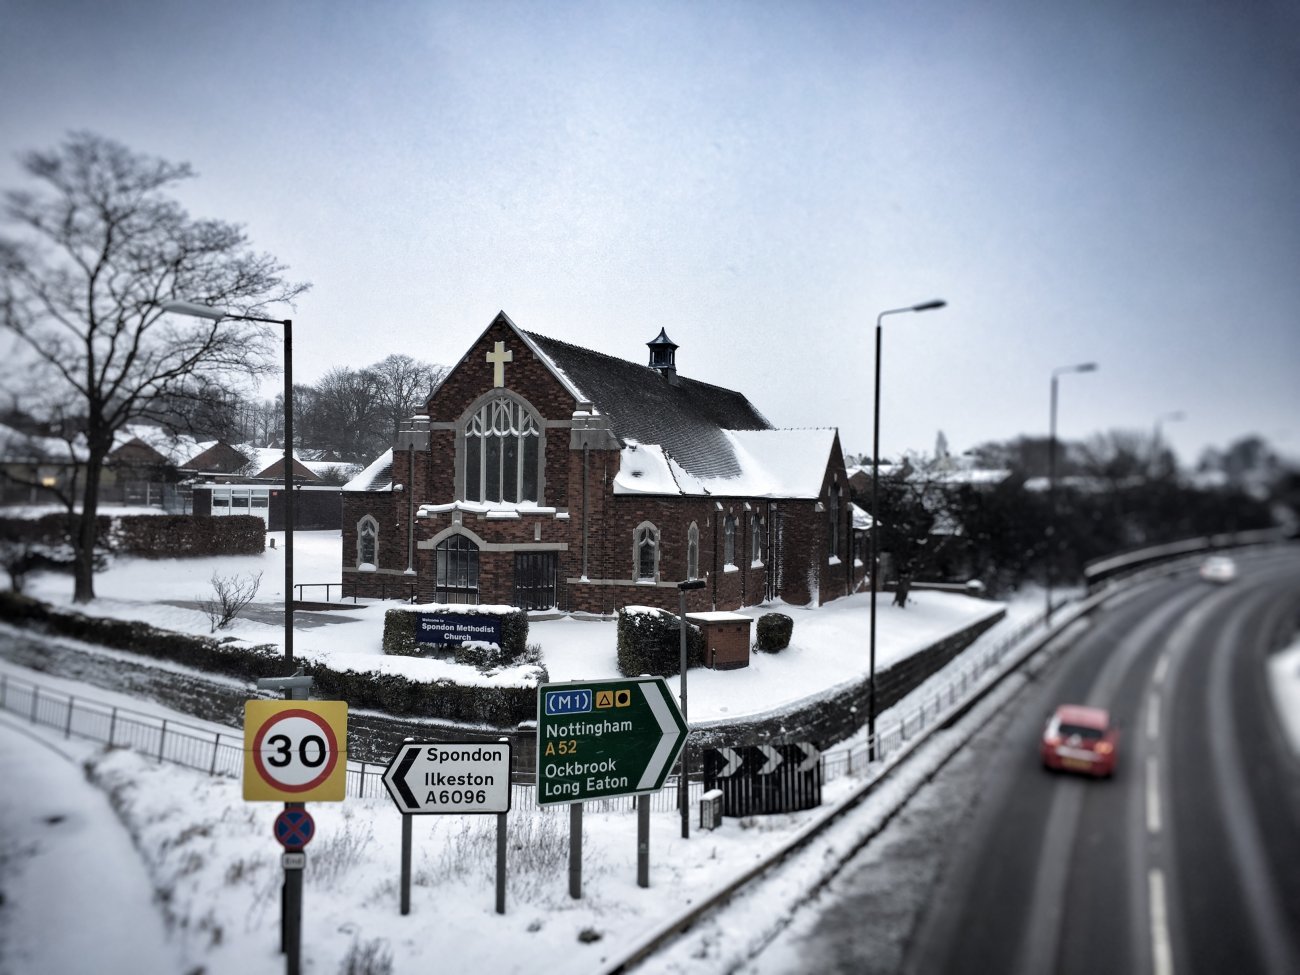 Photograph of Spondon Methodist Church and the A52